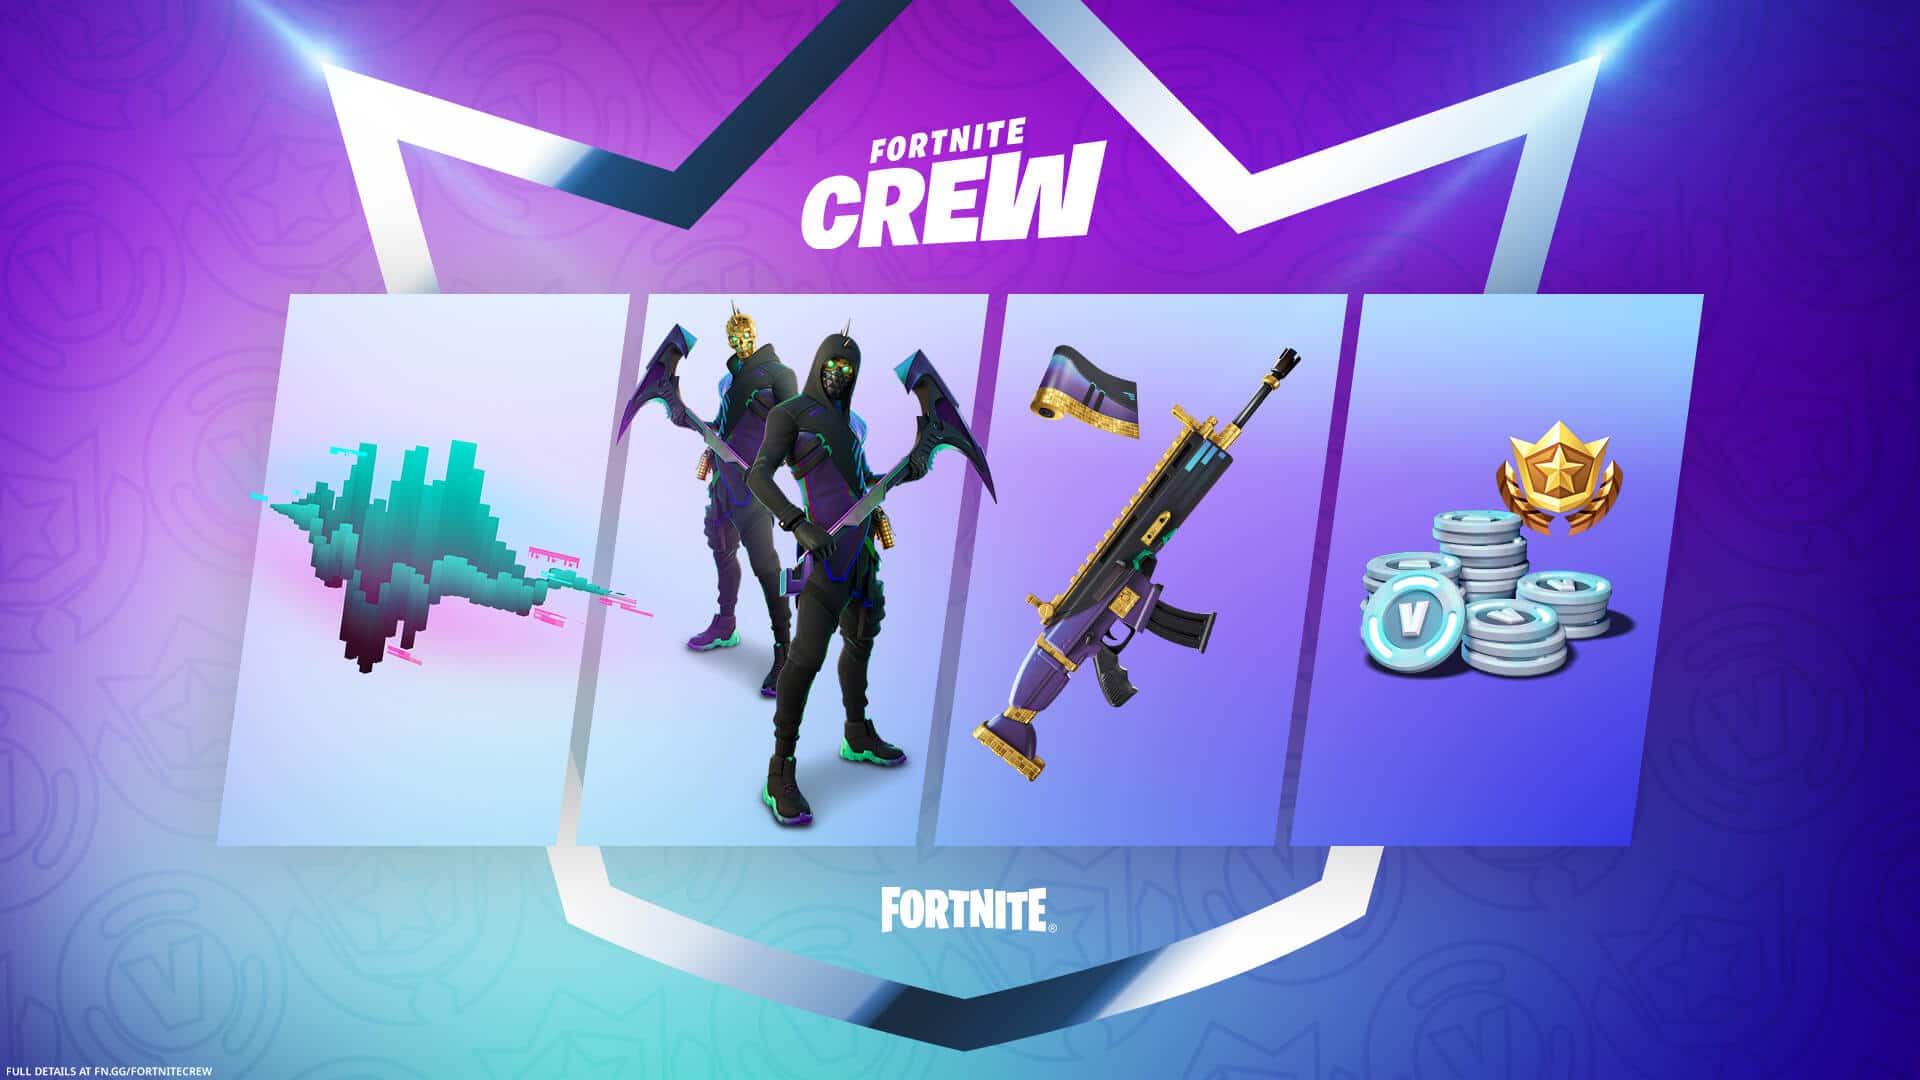 Fortnite Crew February - Aftermath outfit